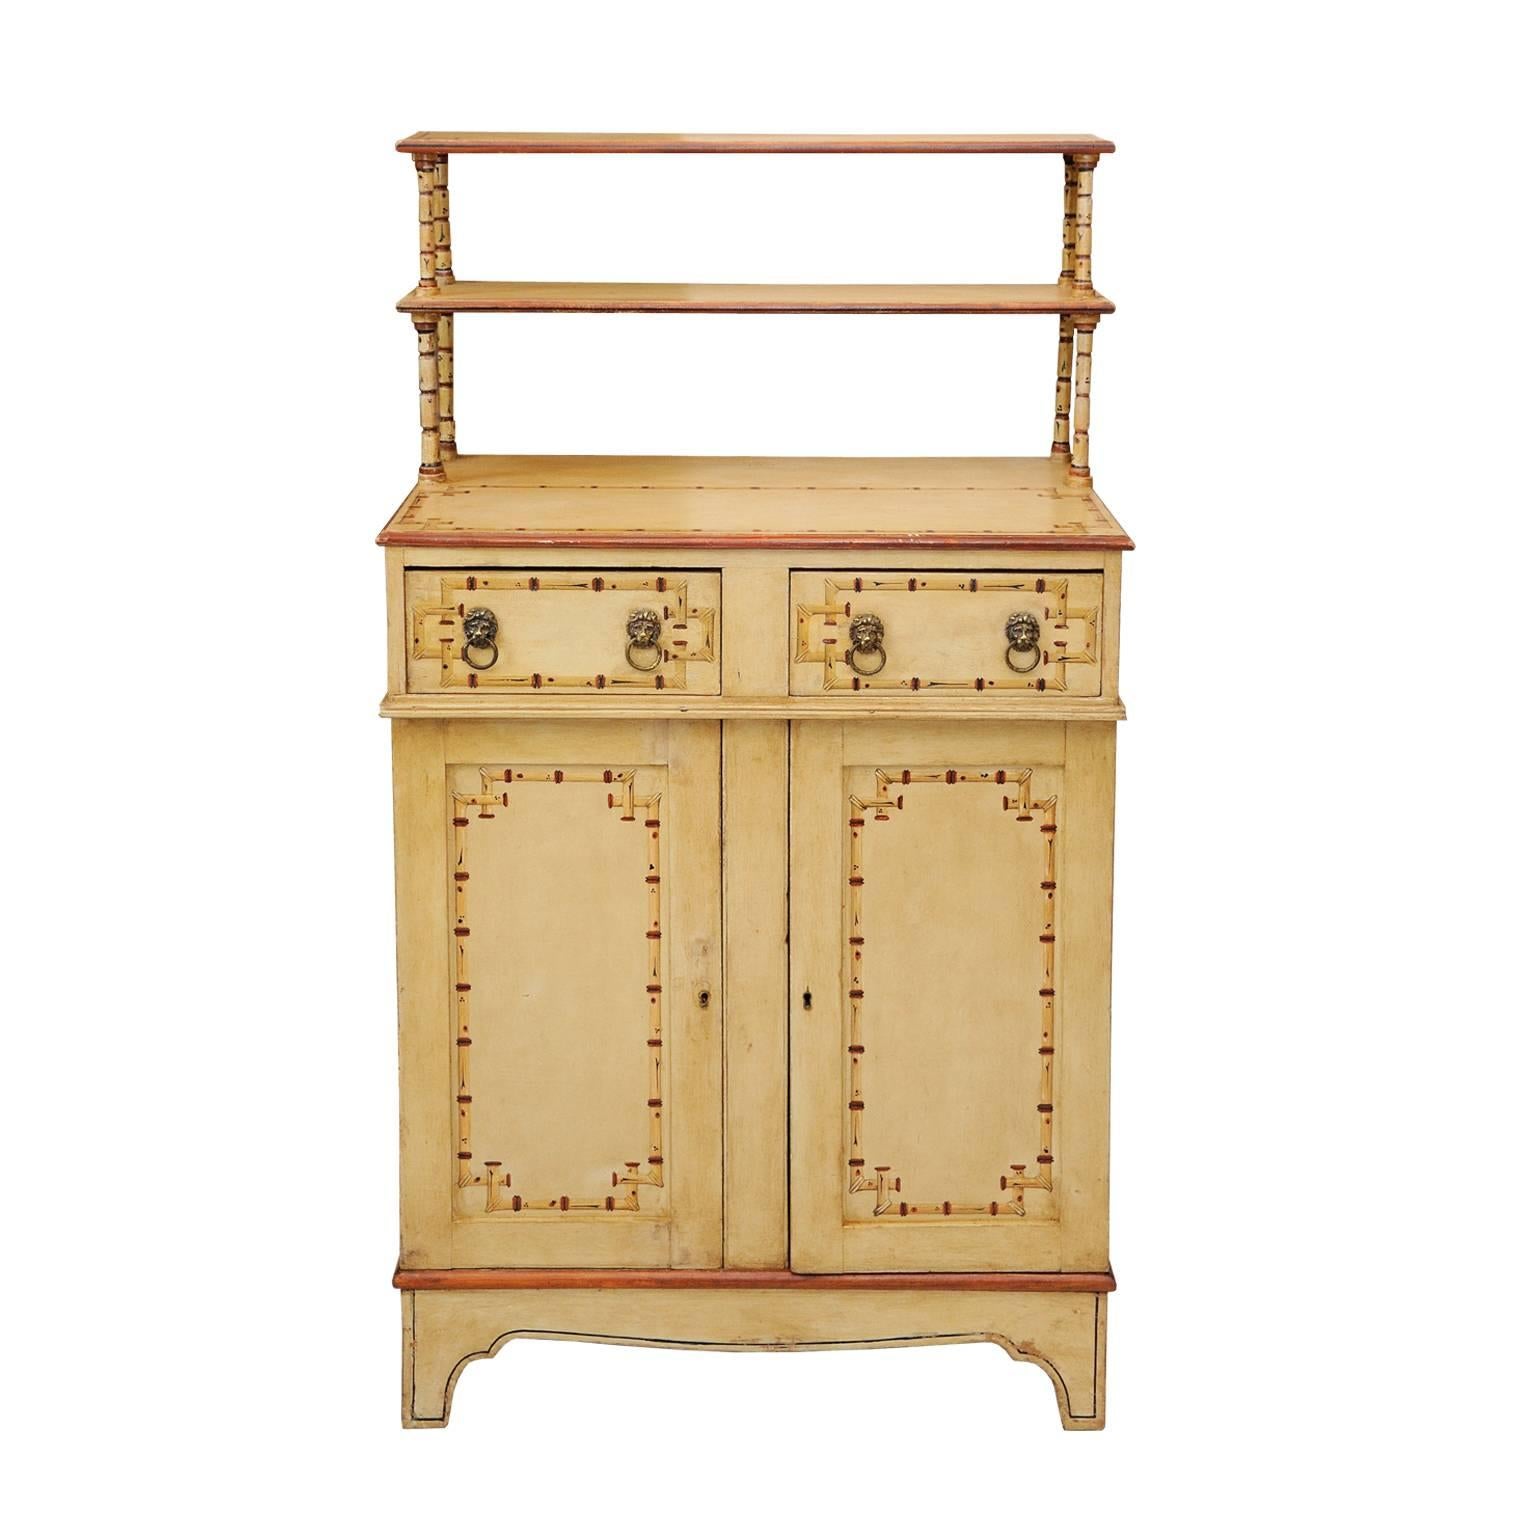 This is a rather wonderful English, early 19th century Regency painted faux bamboo chiffonier cupboard with later painted bamboo decoration.
Featuring an opening shelved cupboard with two draws above and a two-tier shelf at the top. Complete with